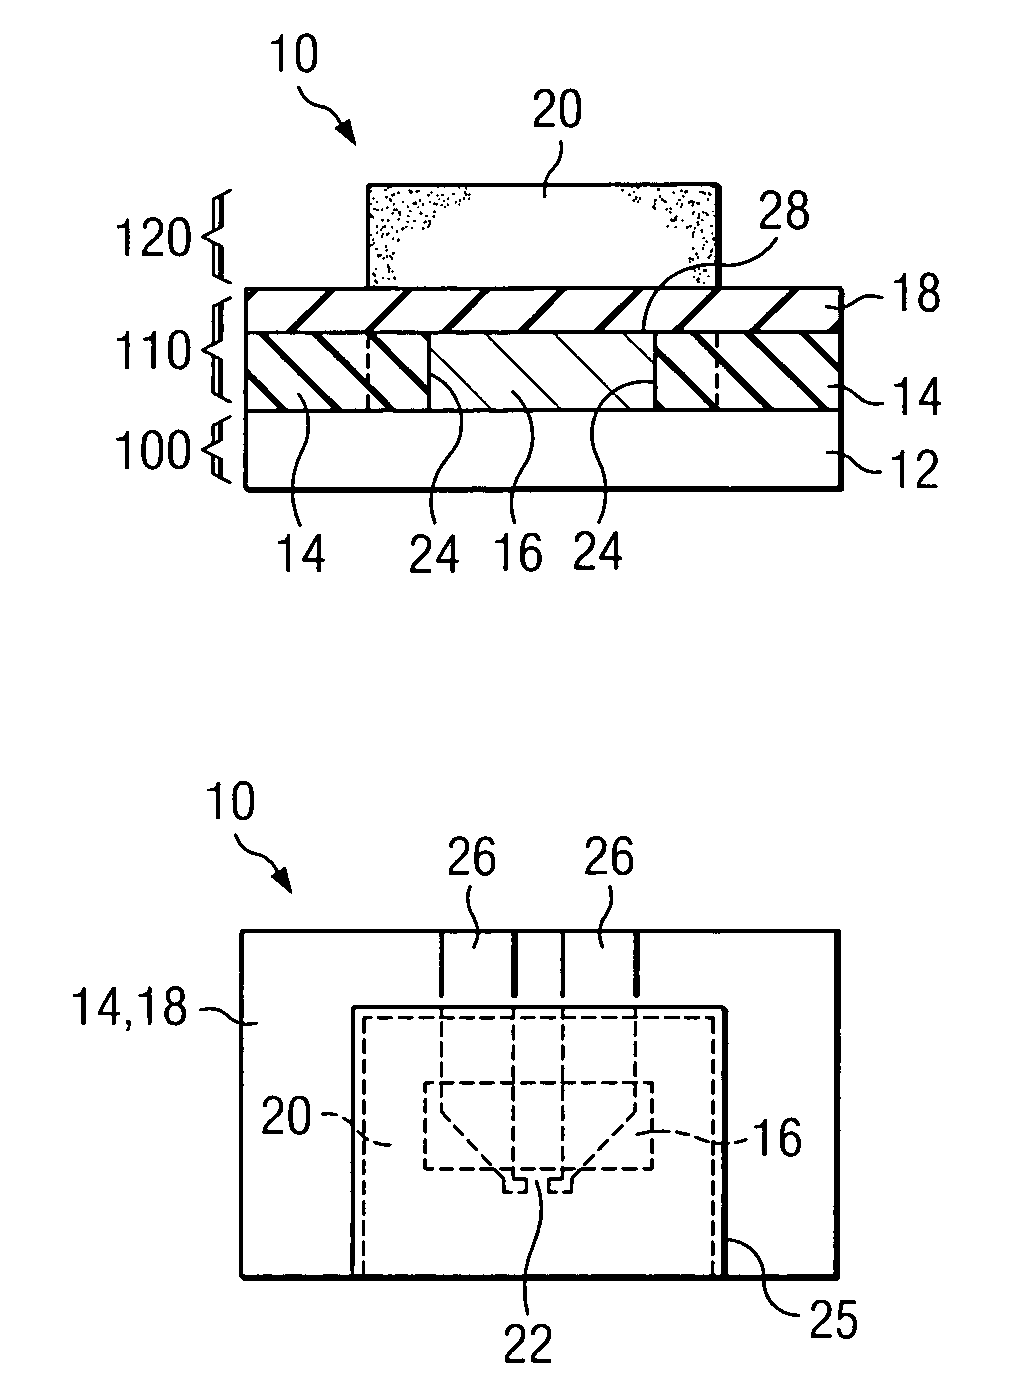 Thin film magnetic head having improved thermal characteristics, and method of manufacturing